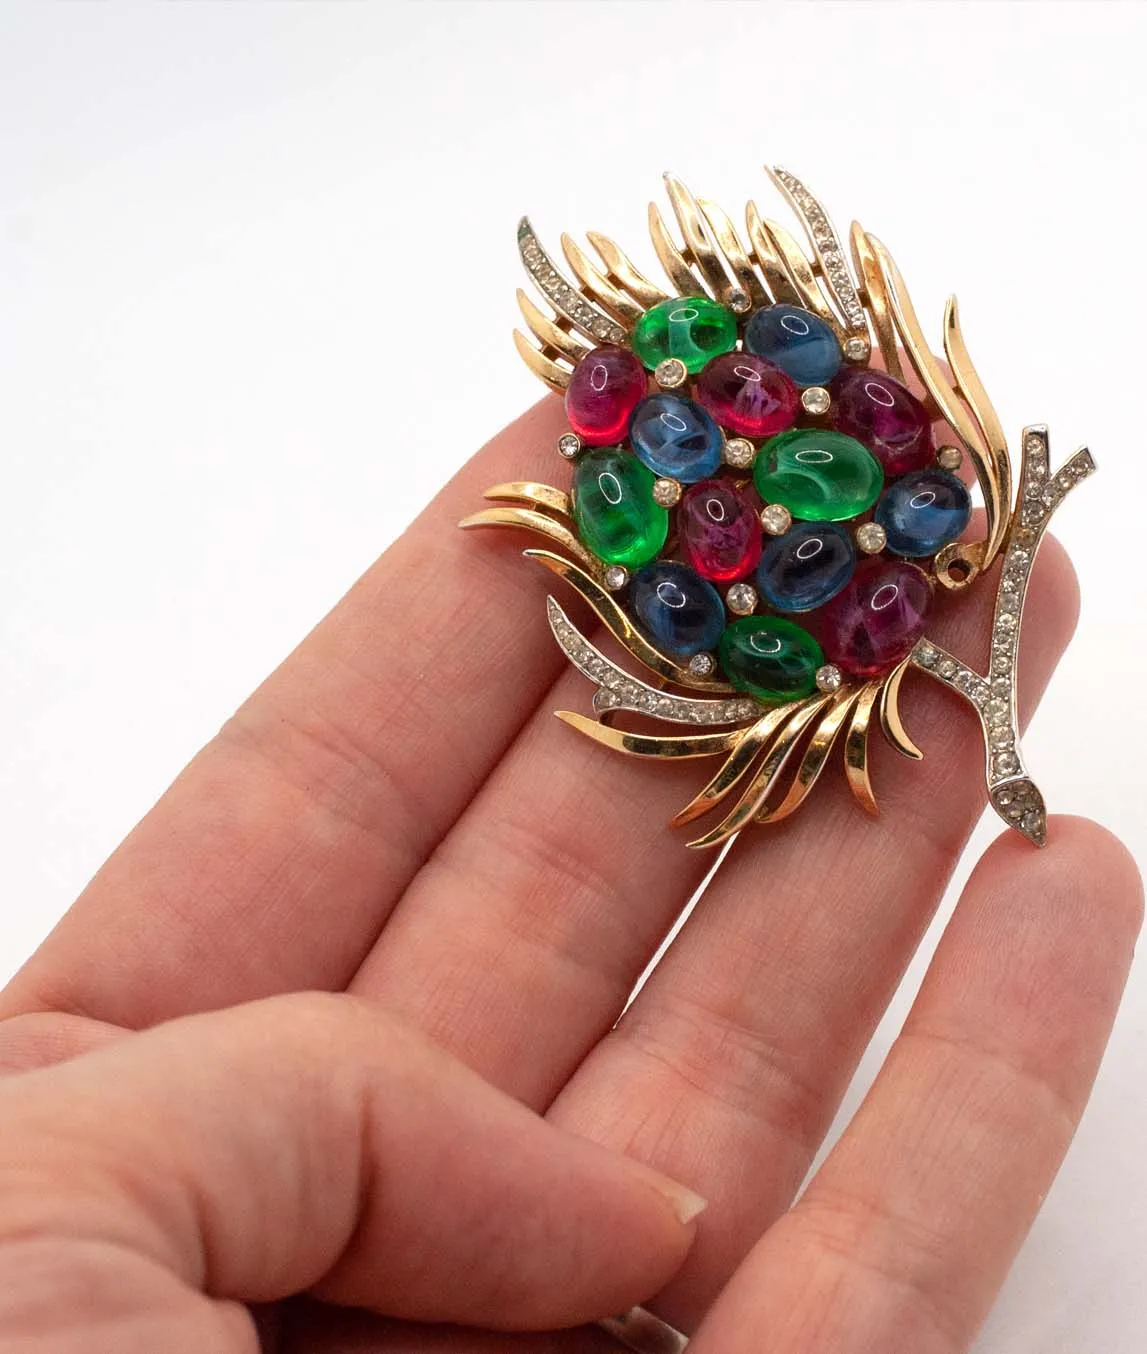 Trifari Jewels of India brooch red blue green and gold held in hand